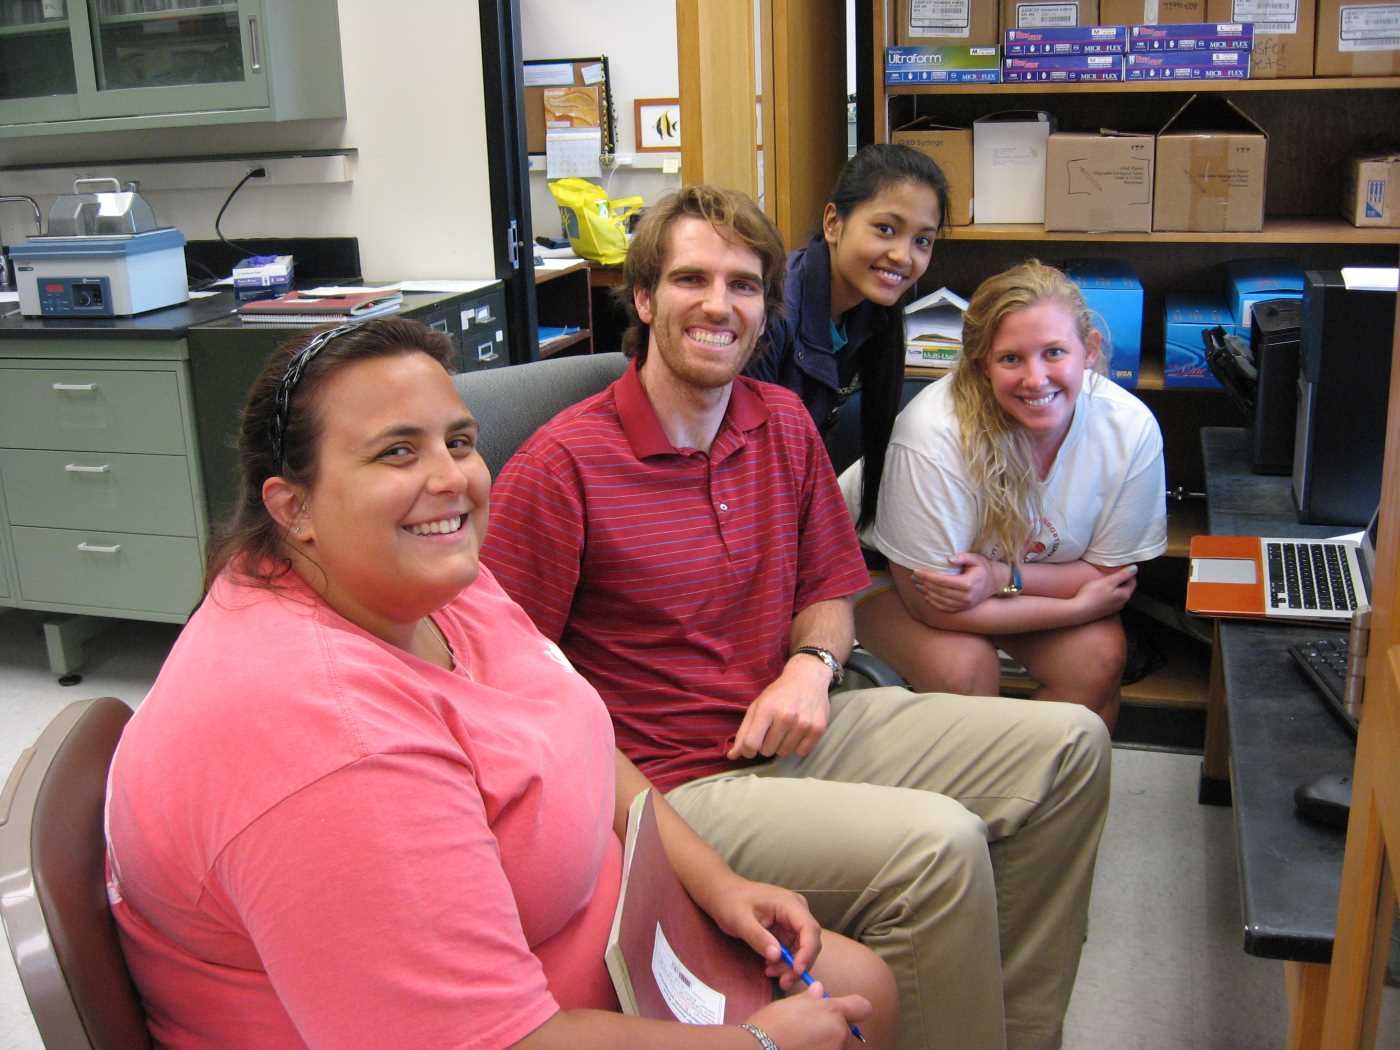 Brian Grone, Karen Jr., Anupa, and Danielle in the lab